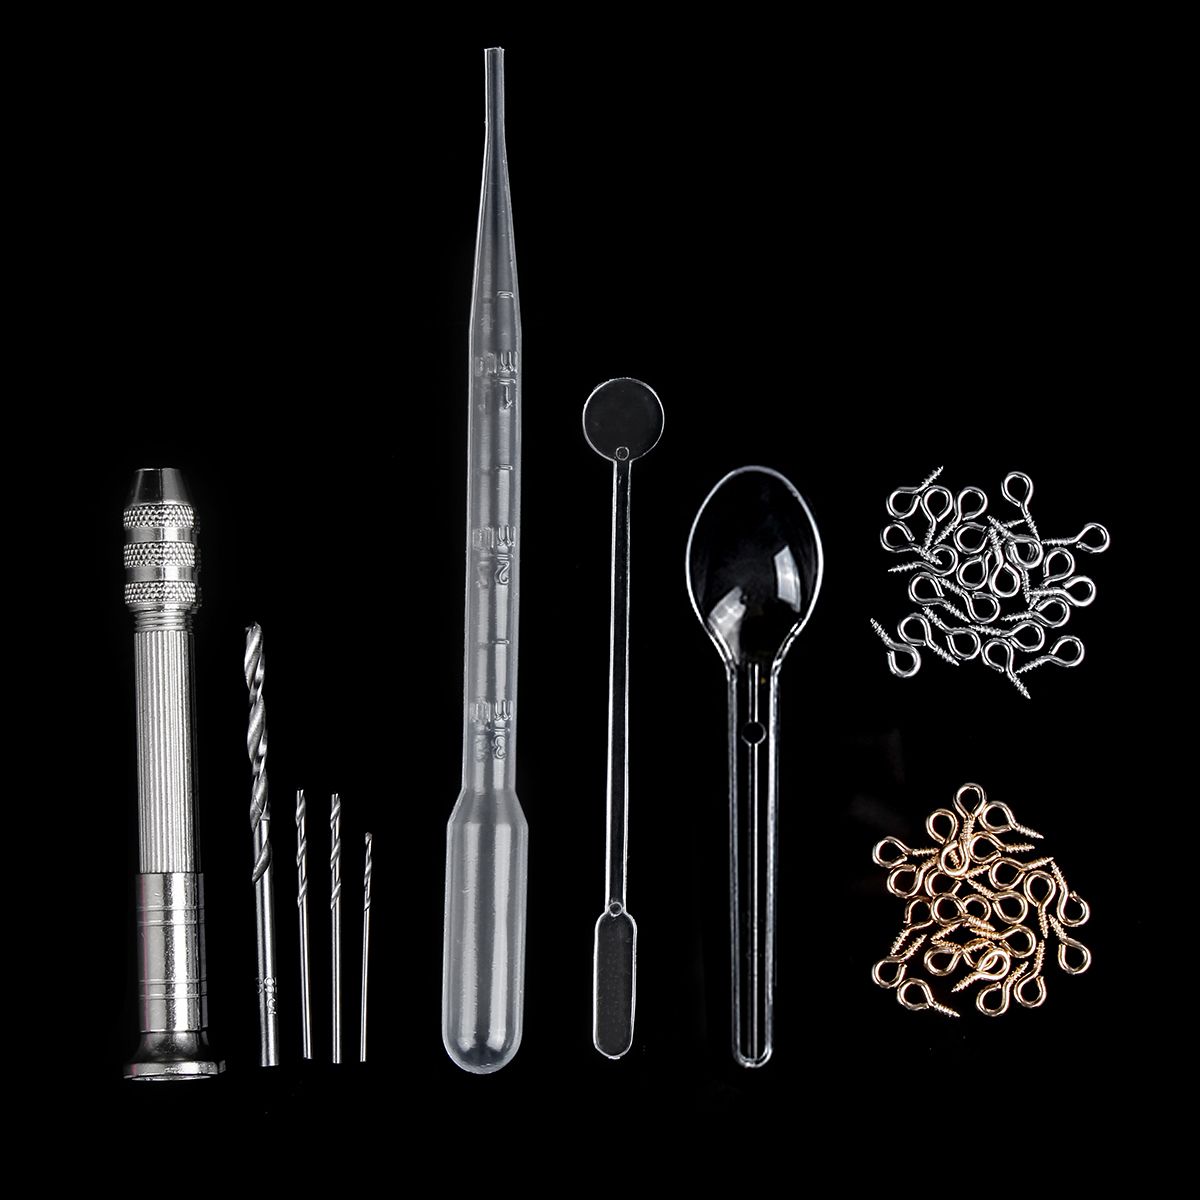 184Pcs-Resin-Casting-Mold-Silicone-DIY-Mold-Jewelry-Pendant-Mould-Making-Craft-Kit-1761600